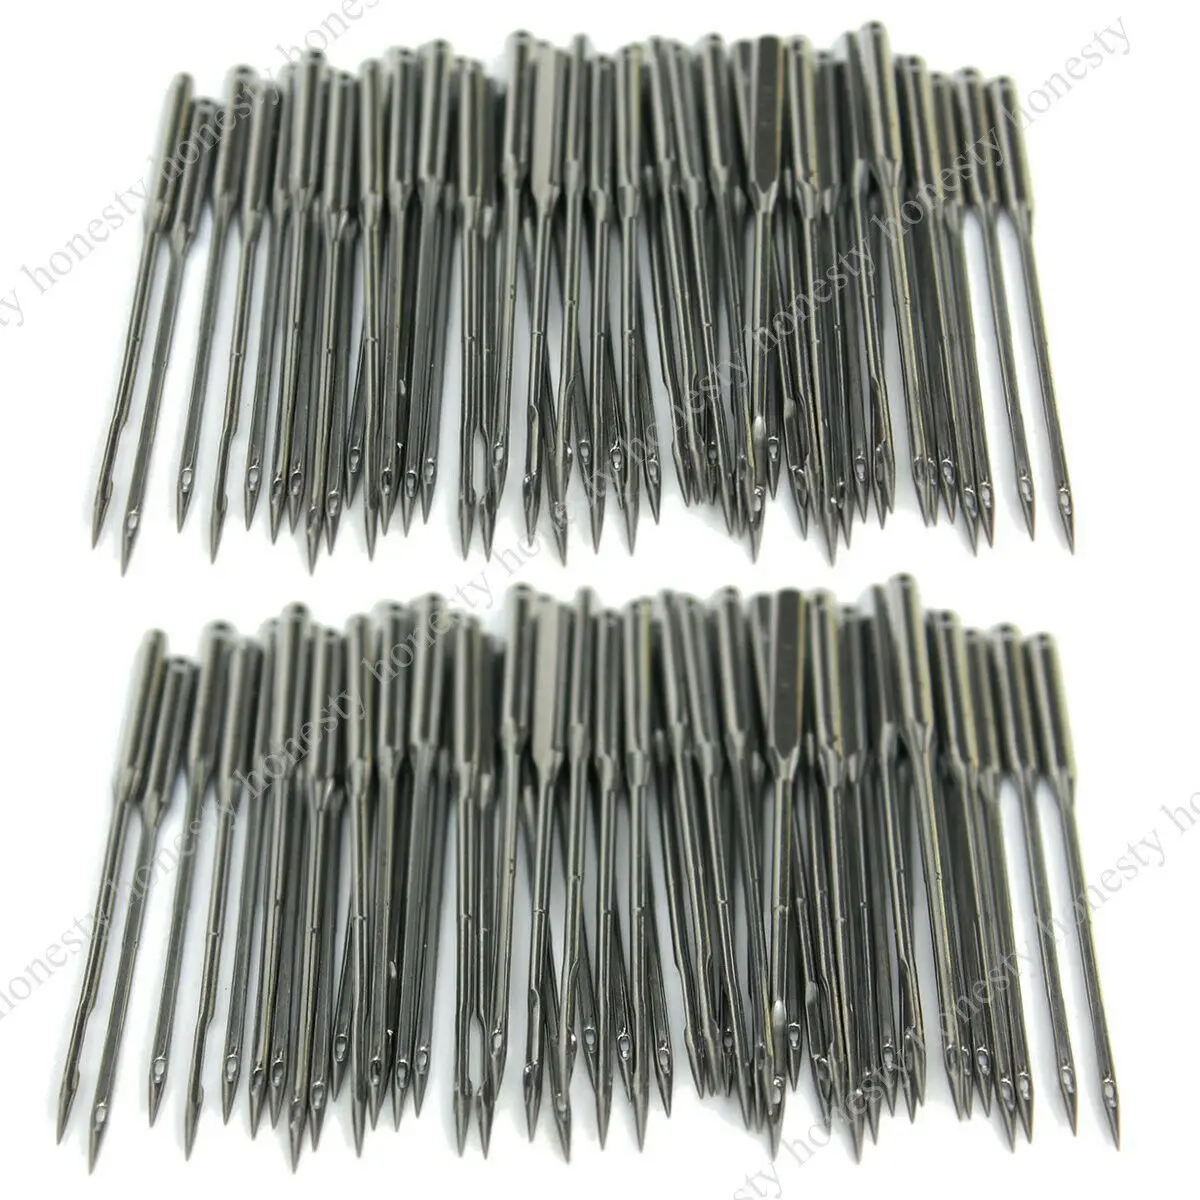 

10pcs/bag FLYING TIGER Home Sewing Machine Needle 11/7512/8014/9016/10018/110 fit for Singer